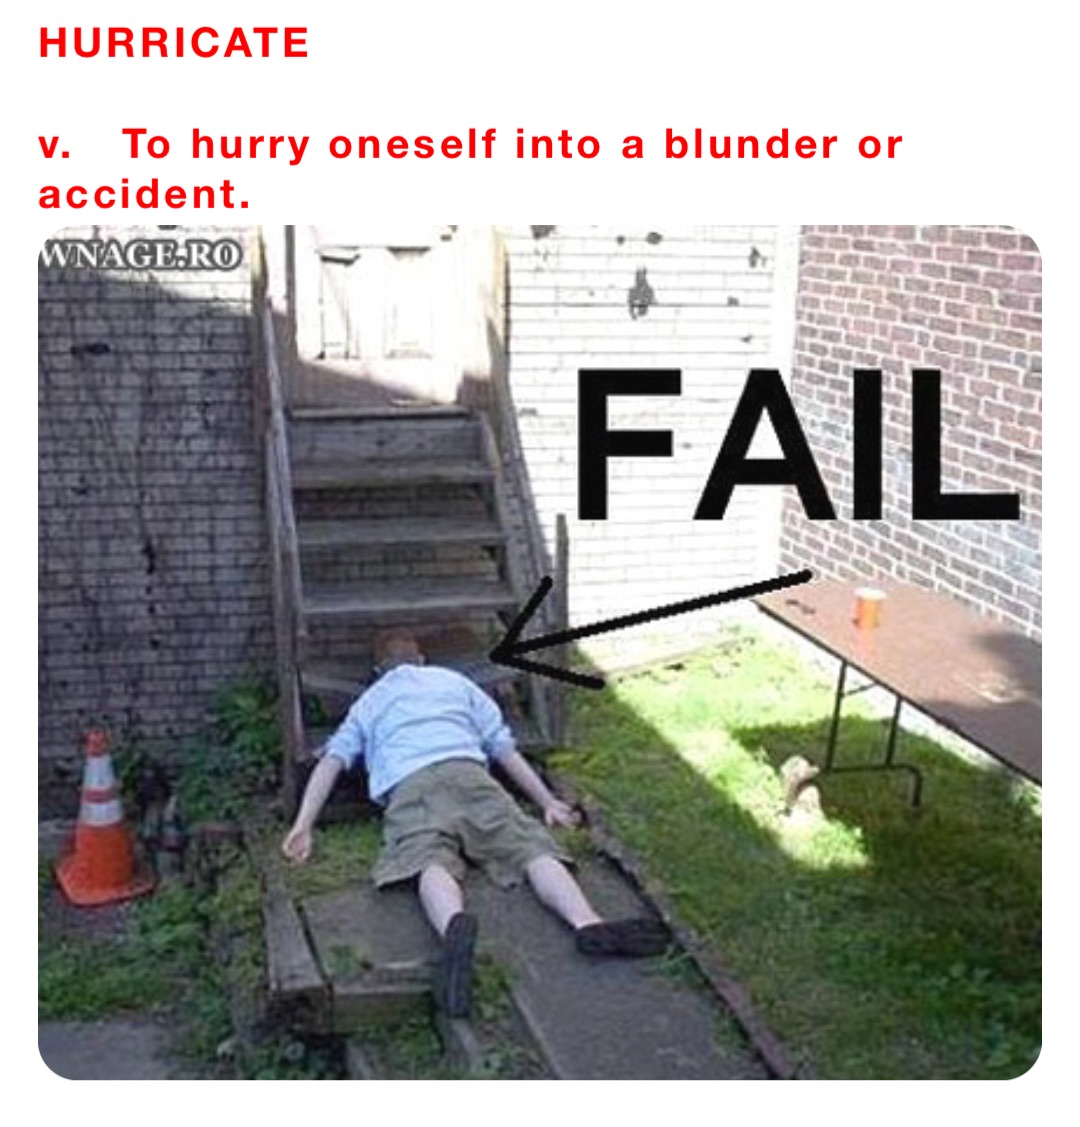 HURRICATE

v.   To hurry oneself into a blunder or accident.